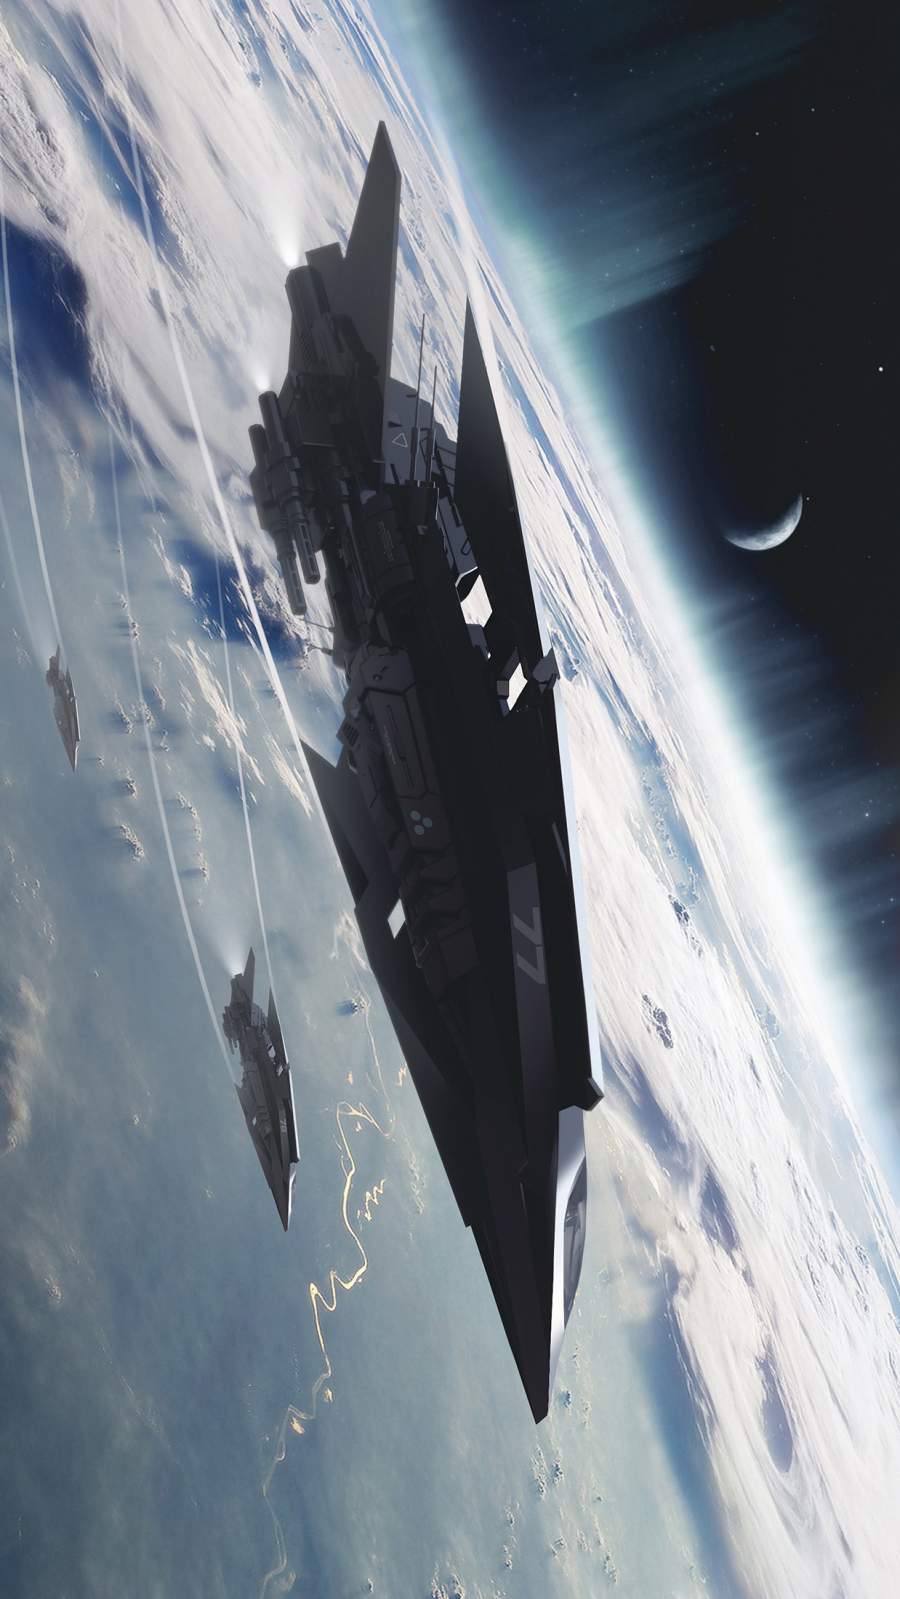 Space Fighter Jets iPhone Wallpaper